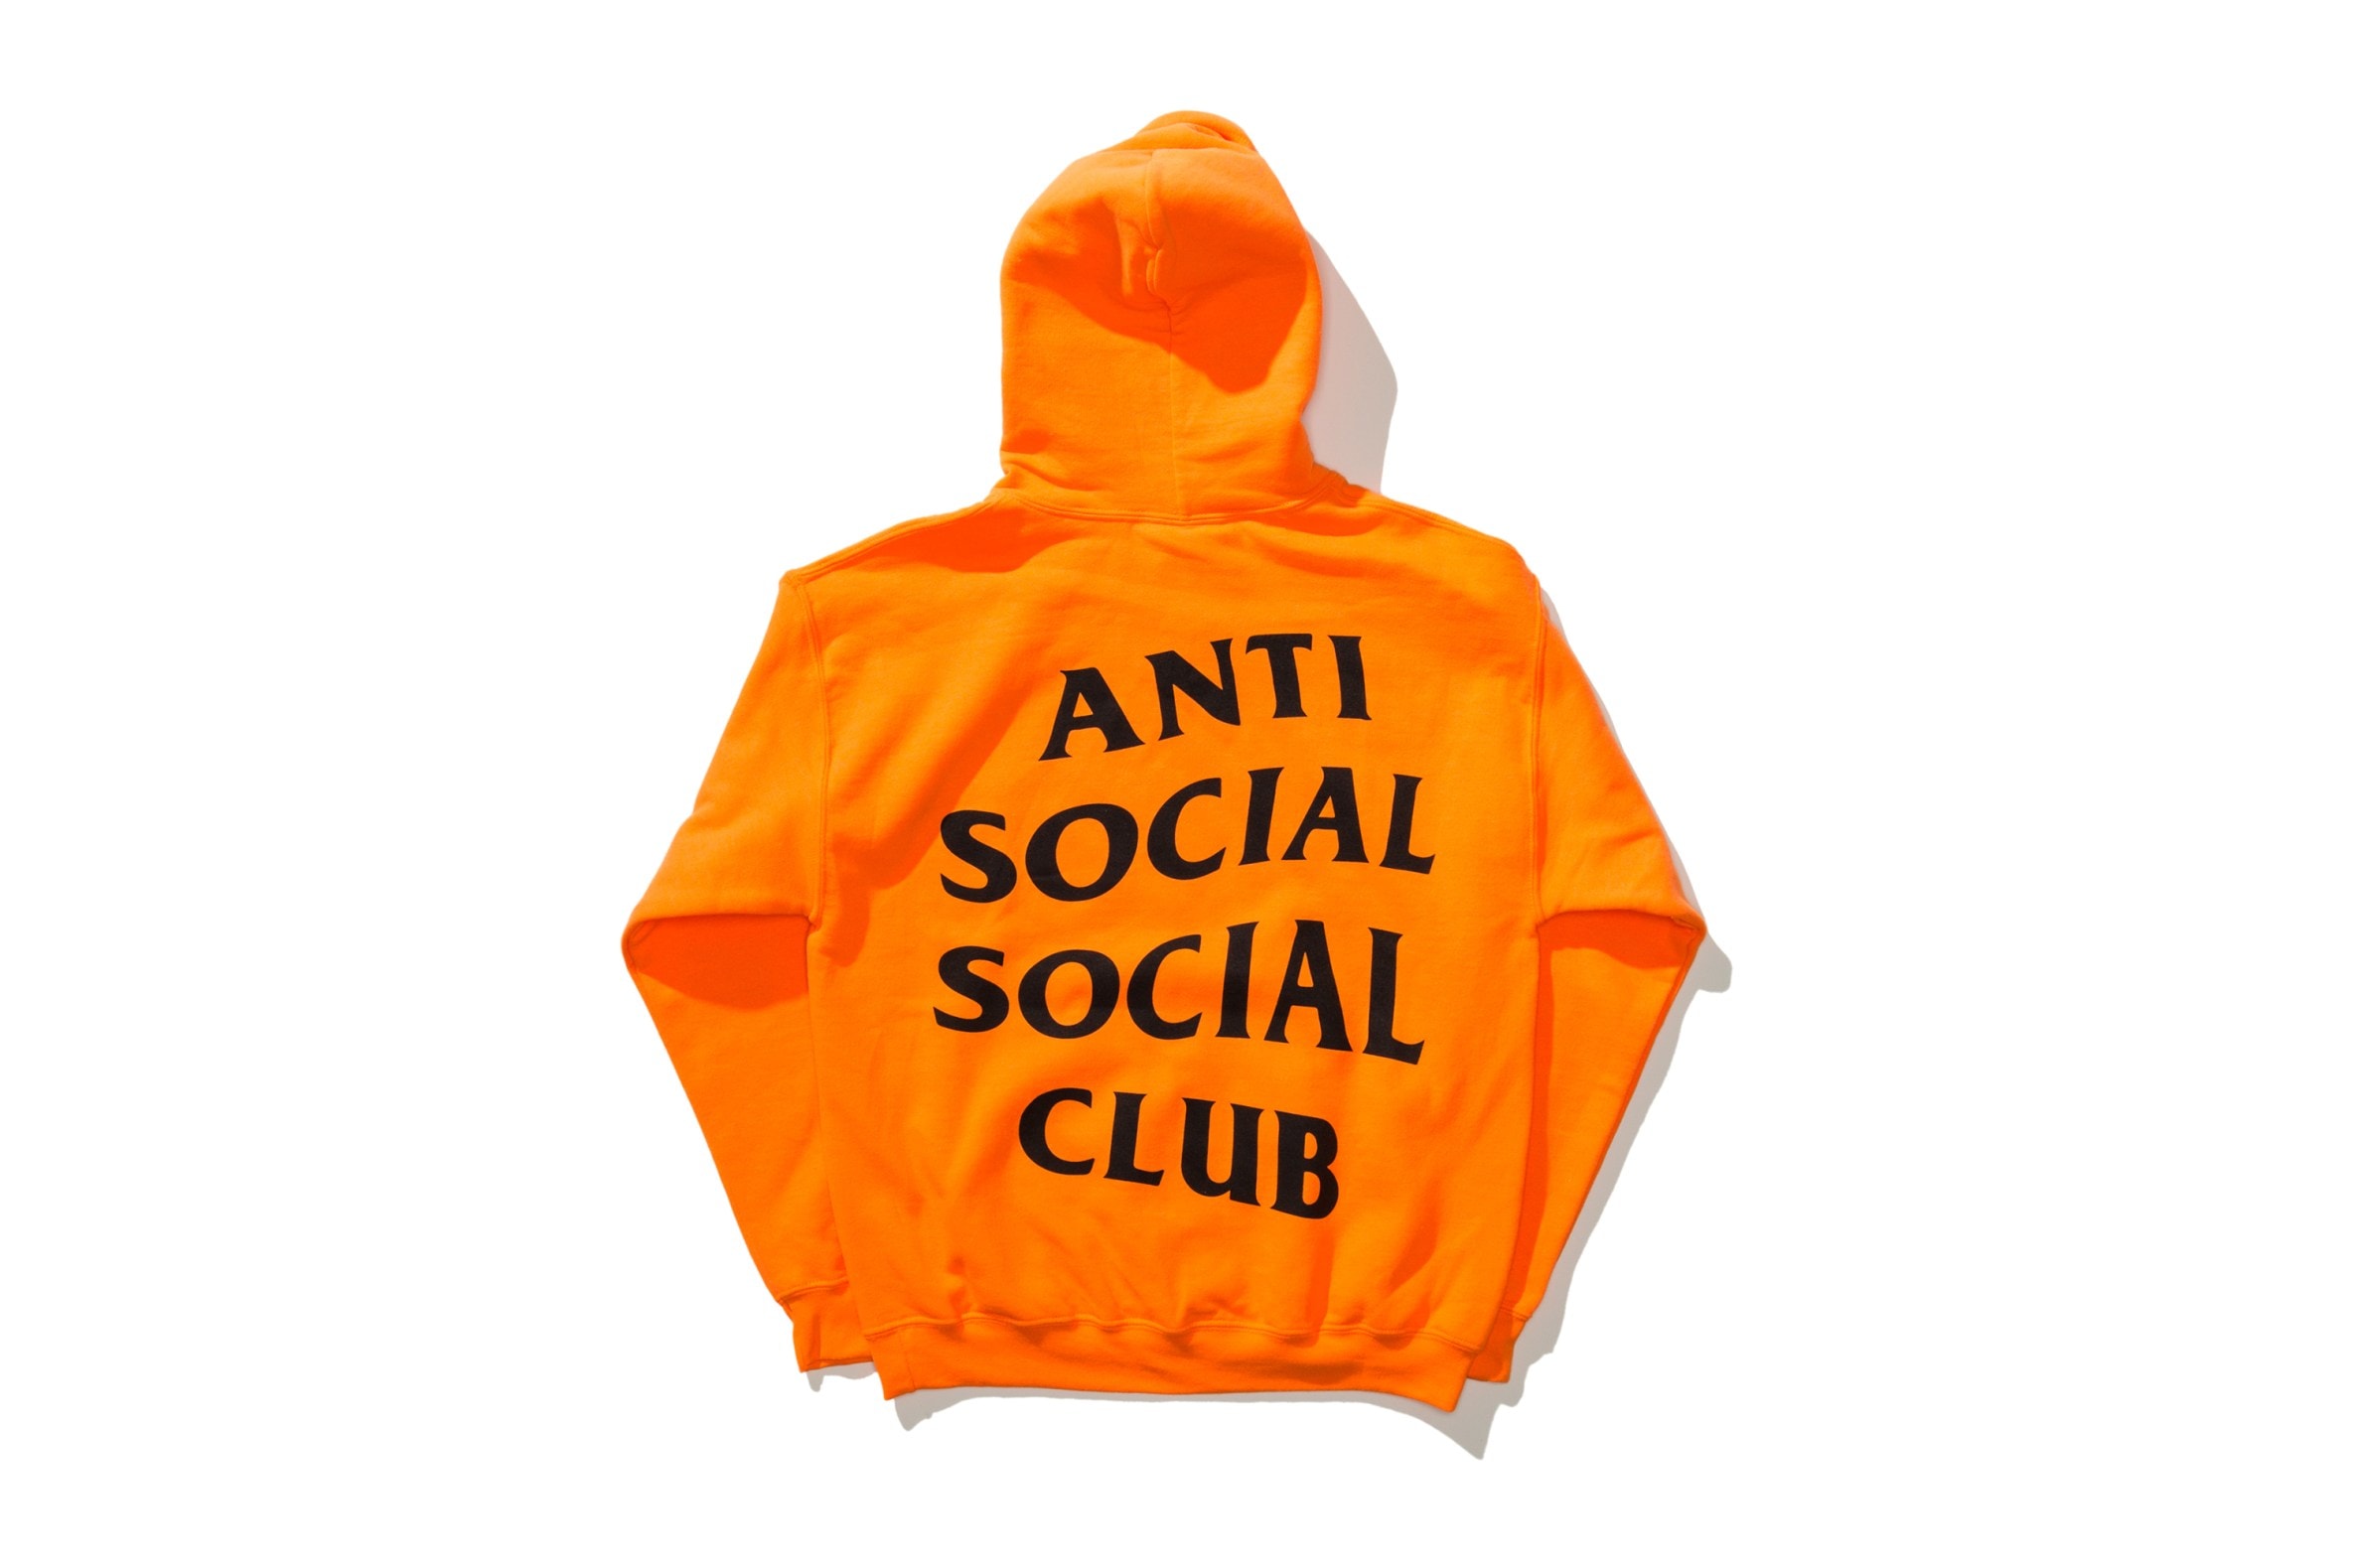 UNDEFEATED x Anti Social Social Club 2016 Capsule Collection